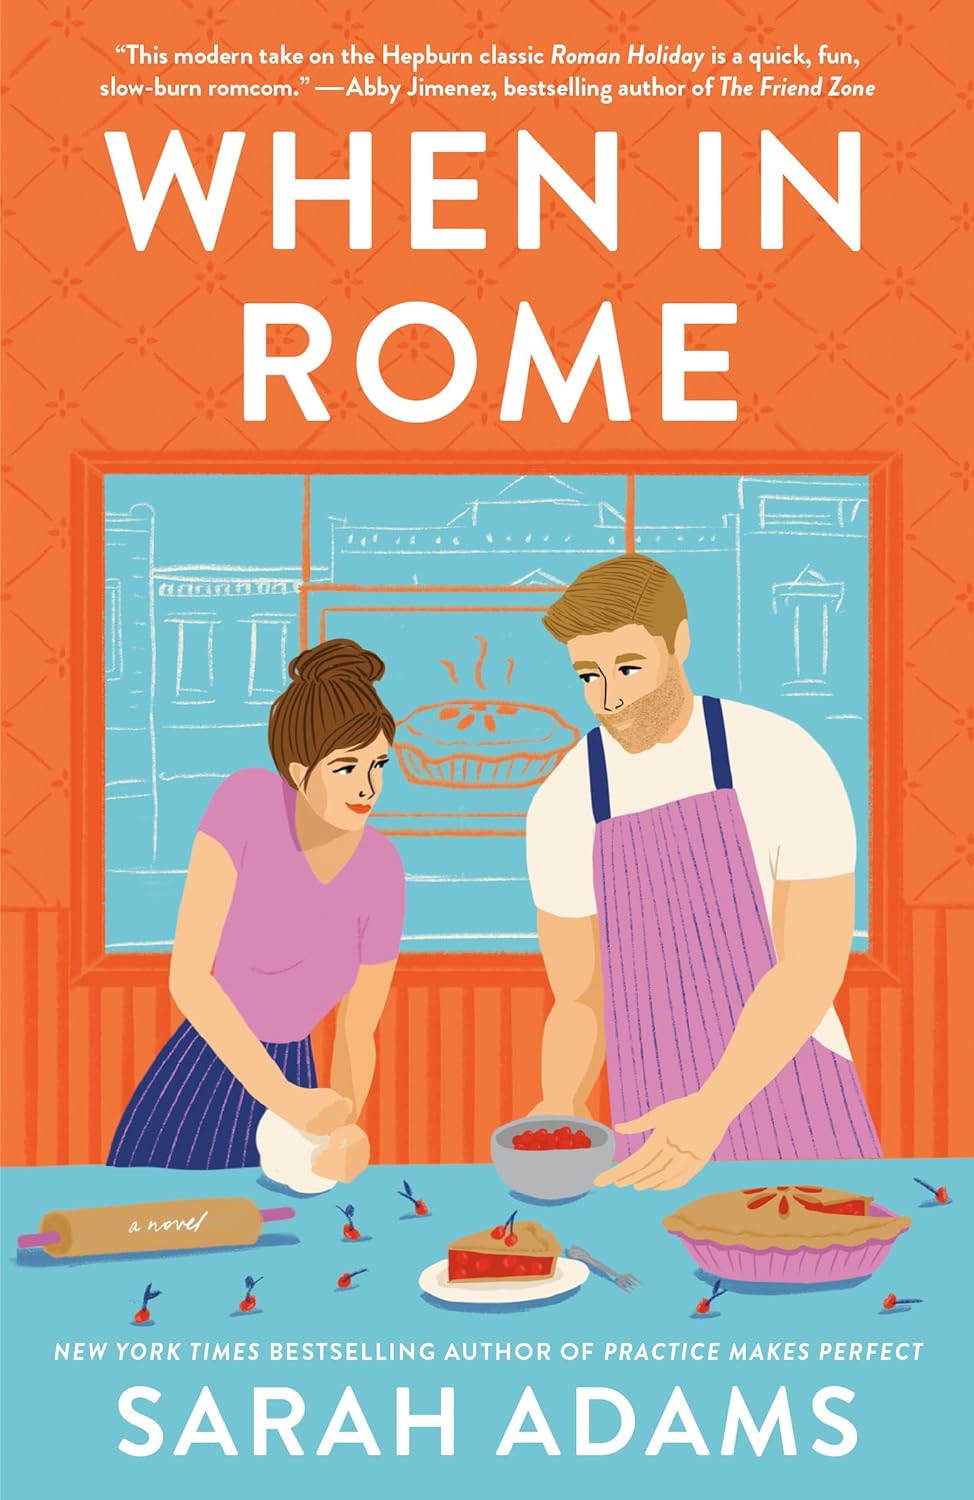 When in Rome - by Sarah Adams